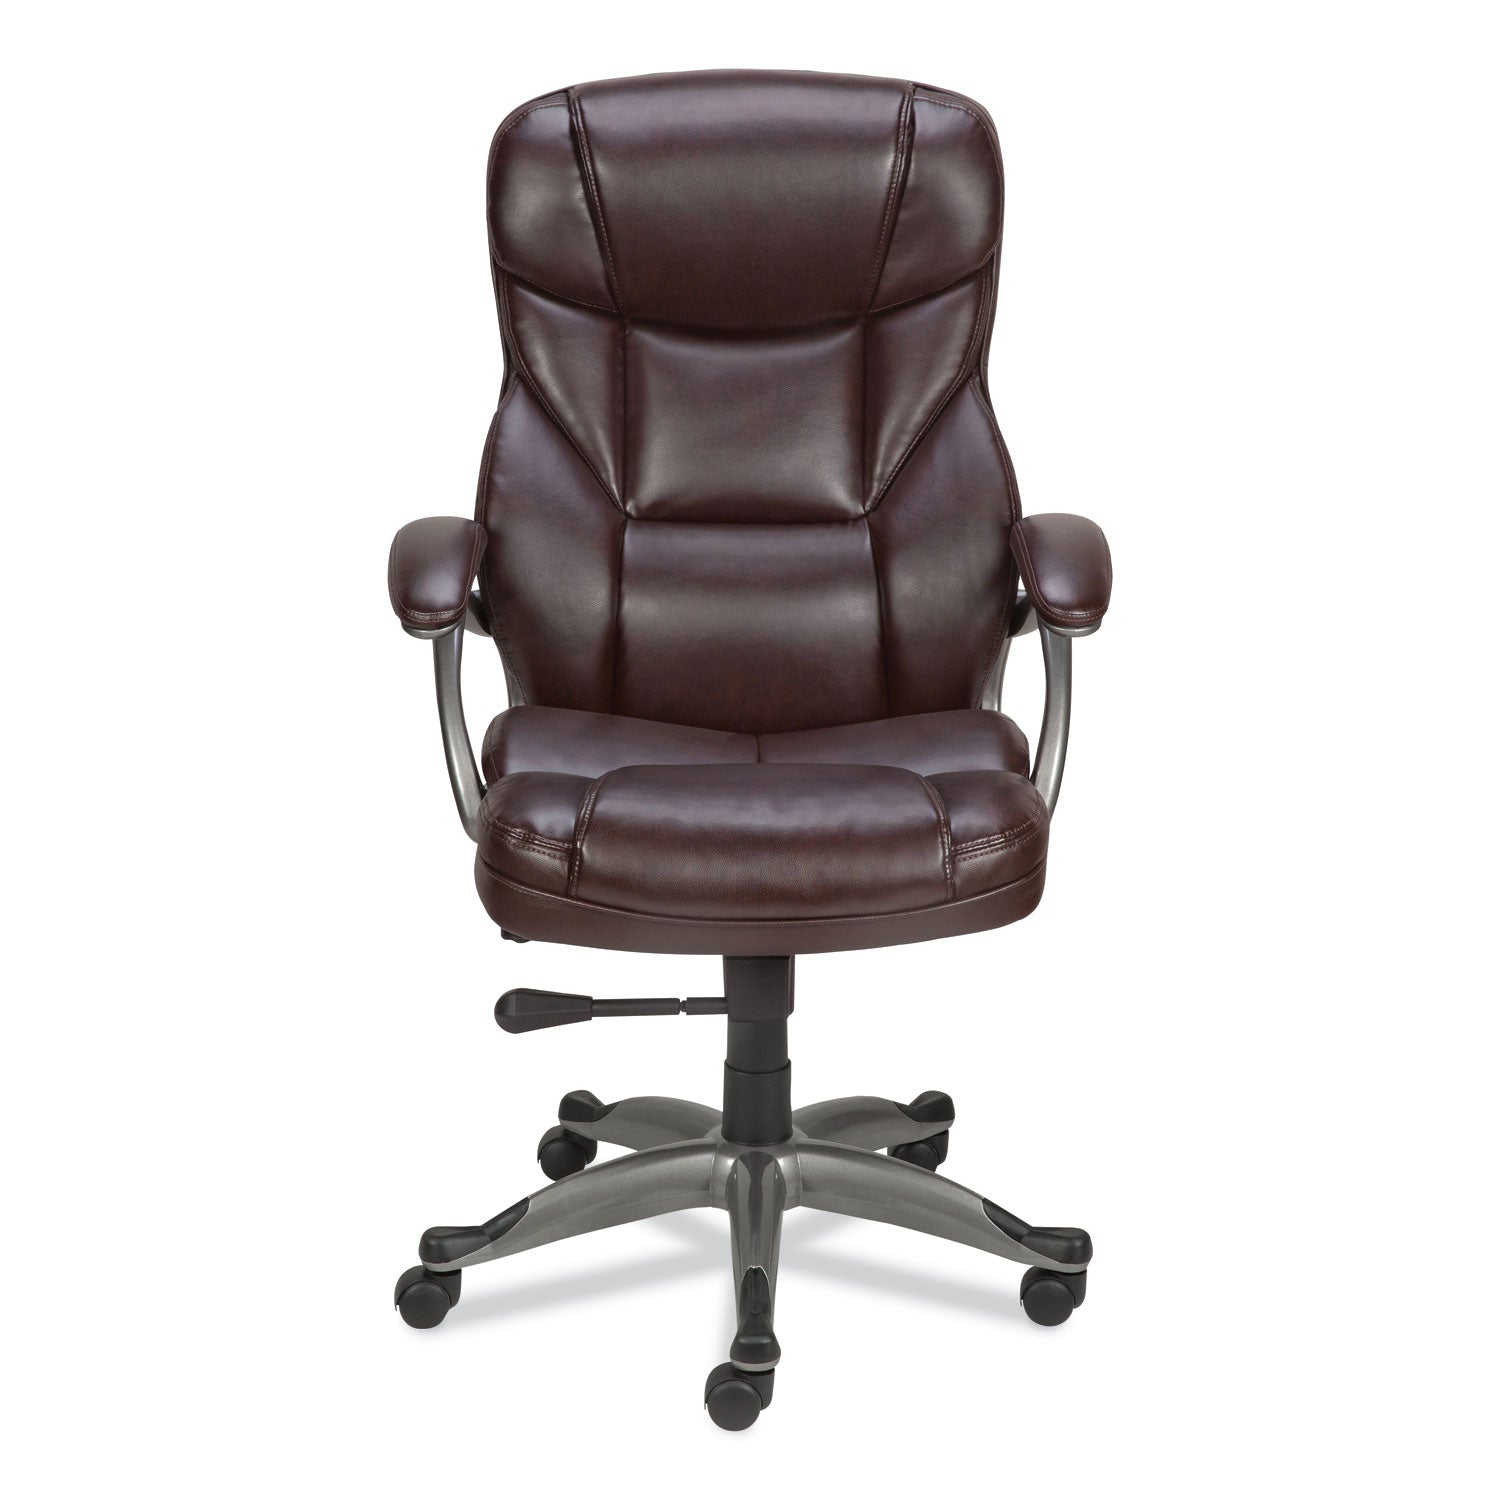 Alera Birns Series High-Back Task Chair, Supports Up to 250 lb, 18.11" to 22.05" Seat Height, Brown Seat/Back, Chrome Base - 1